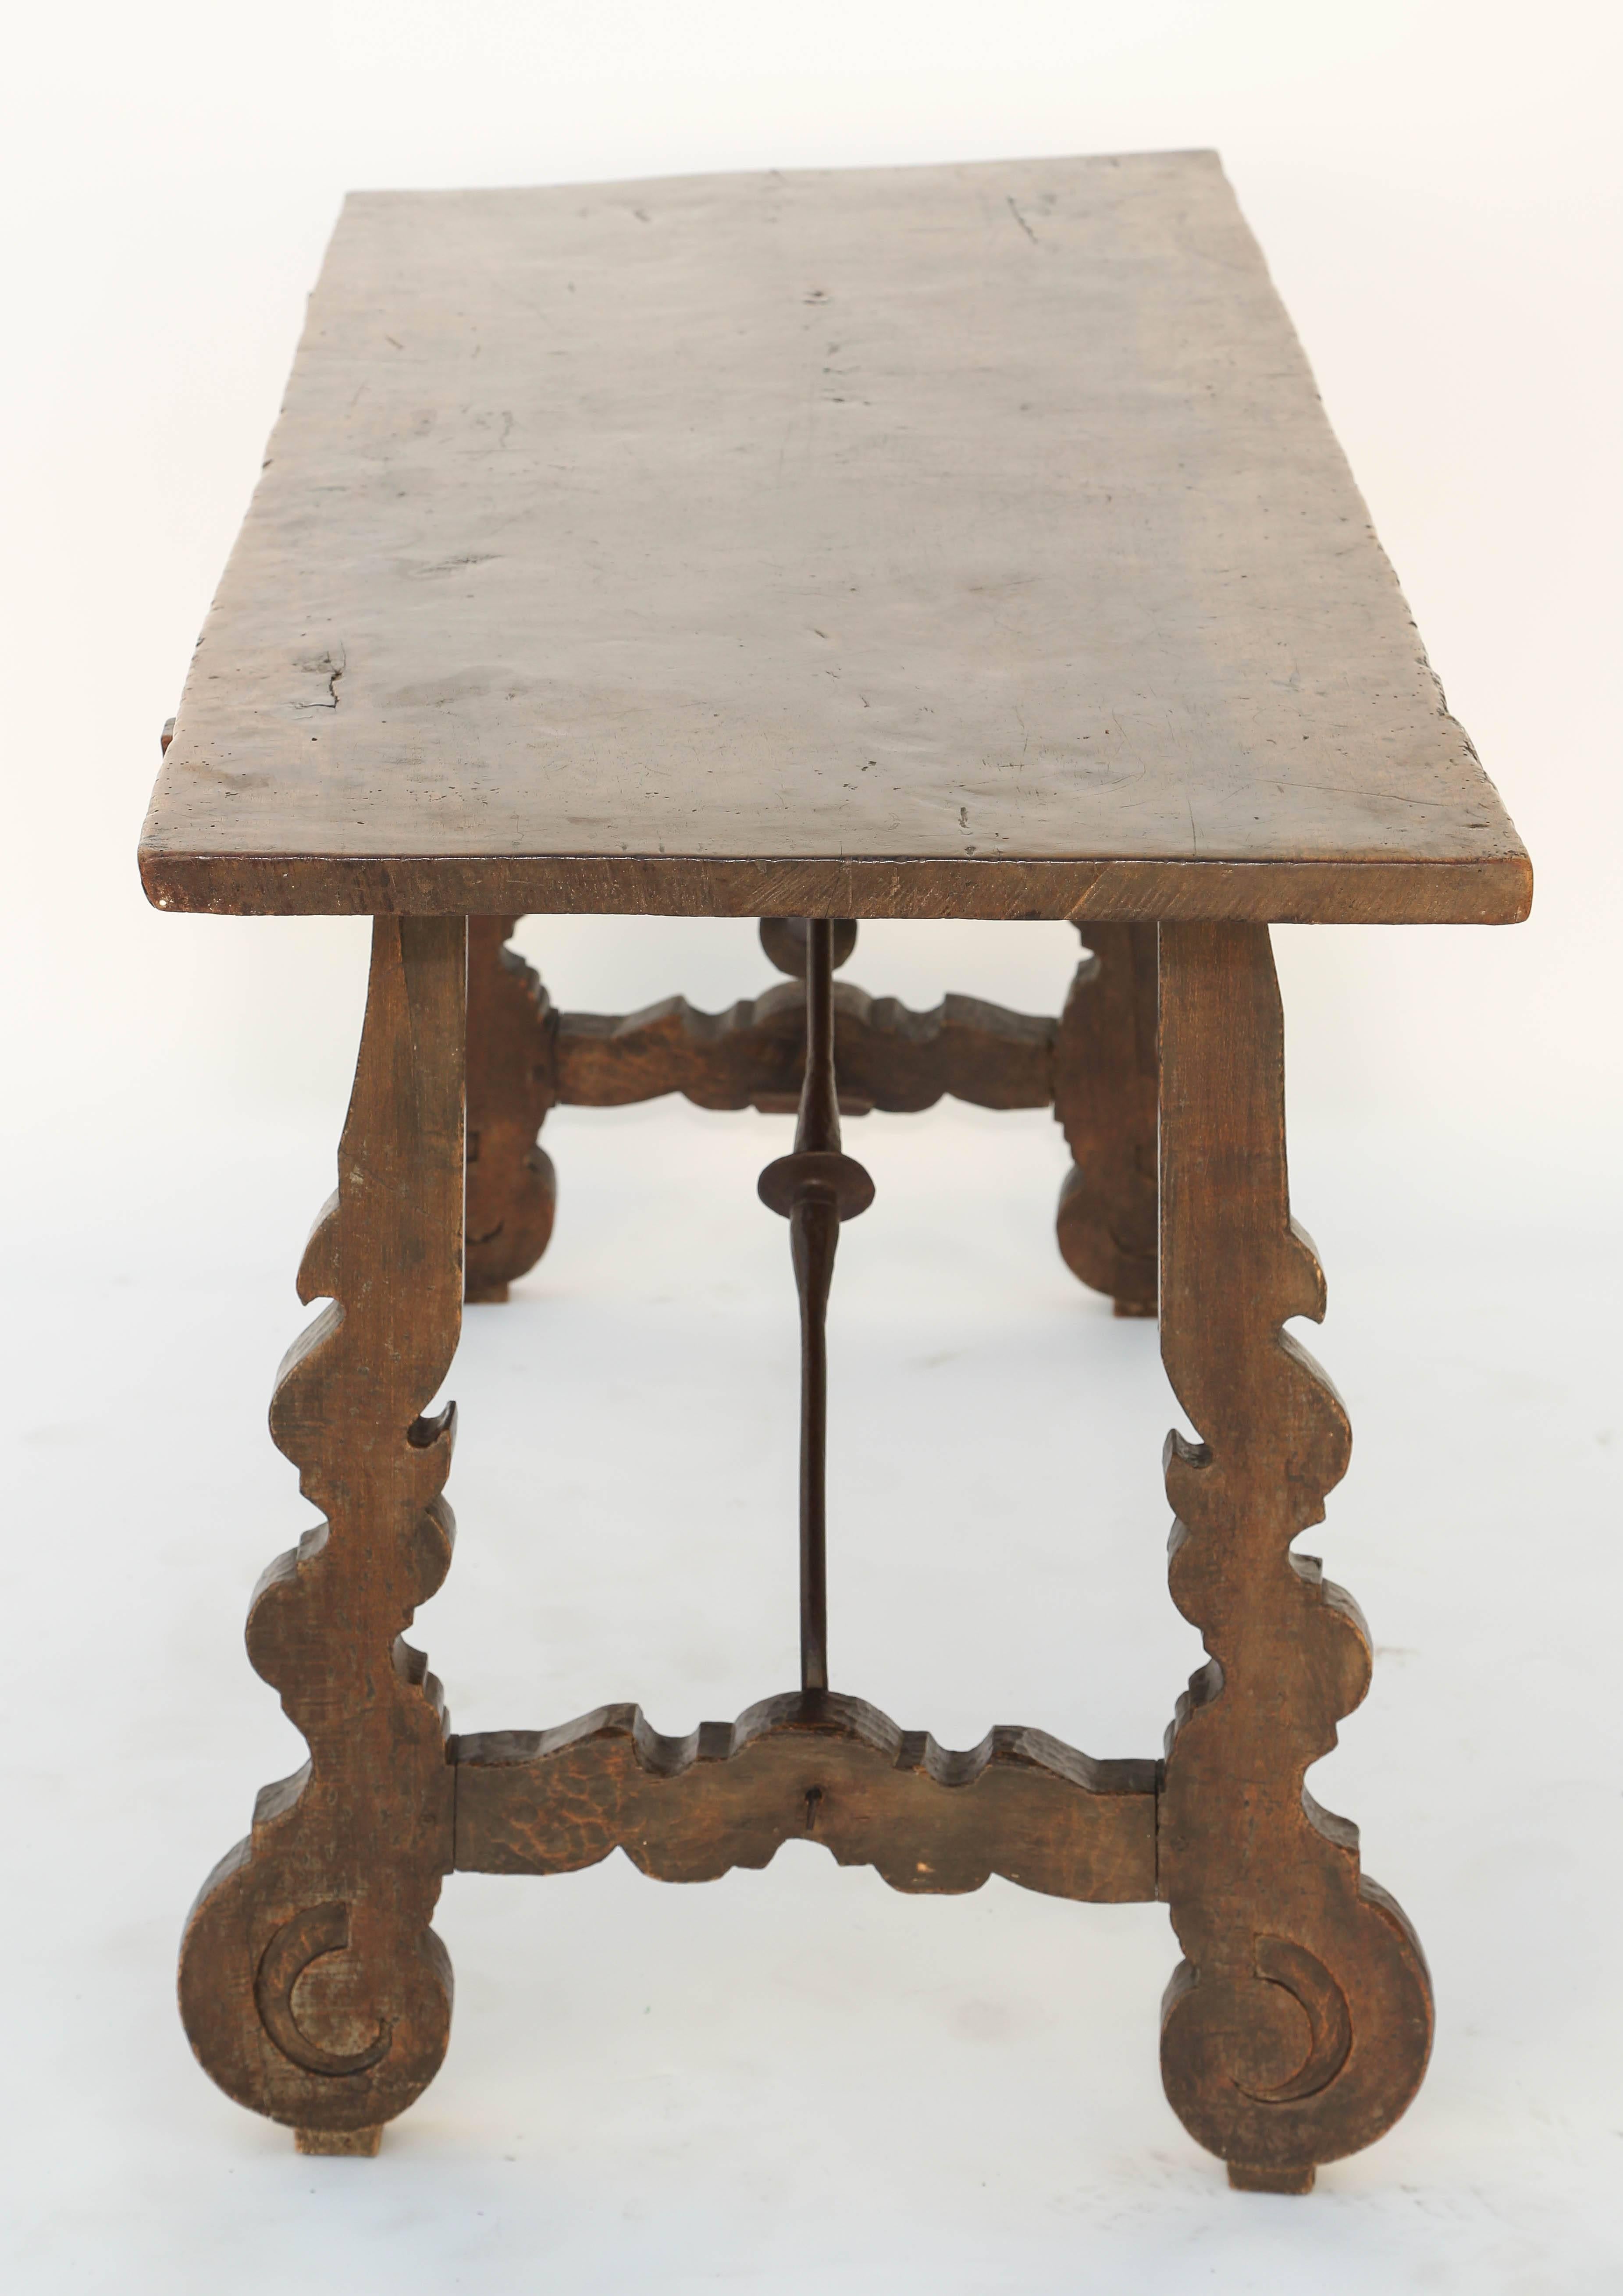 Wrought Iron 17th-18th Century Spanish Colonial Walnut Trestle Table For Sale